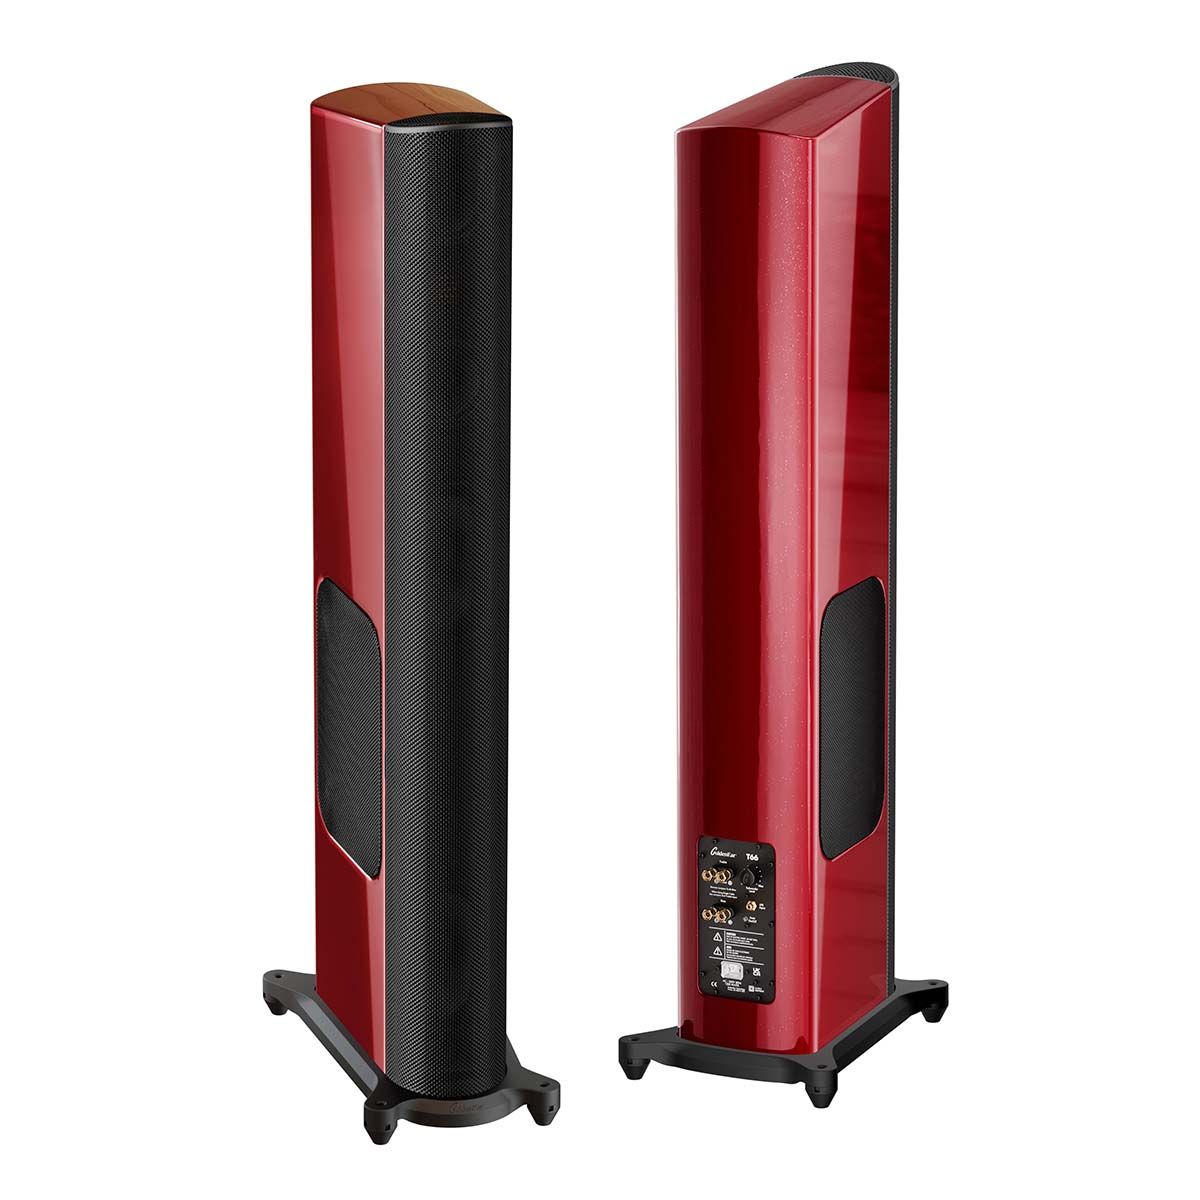 GoldenEar T66 Floorstanding Loudspeaker - Santa Barbara Red - Each view of pair, one front view with grille, one rear view